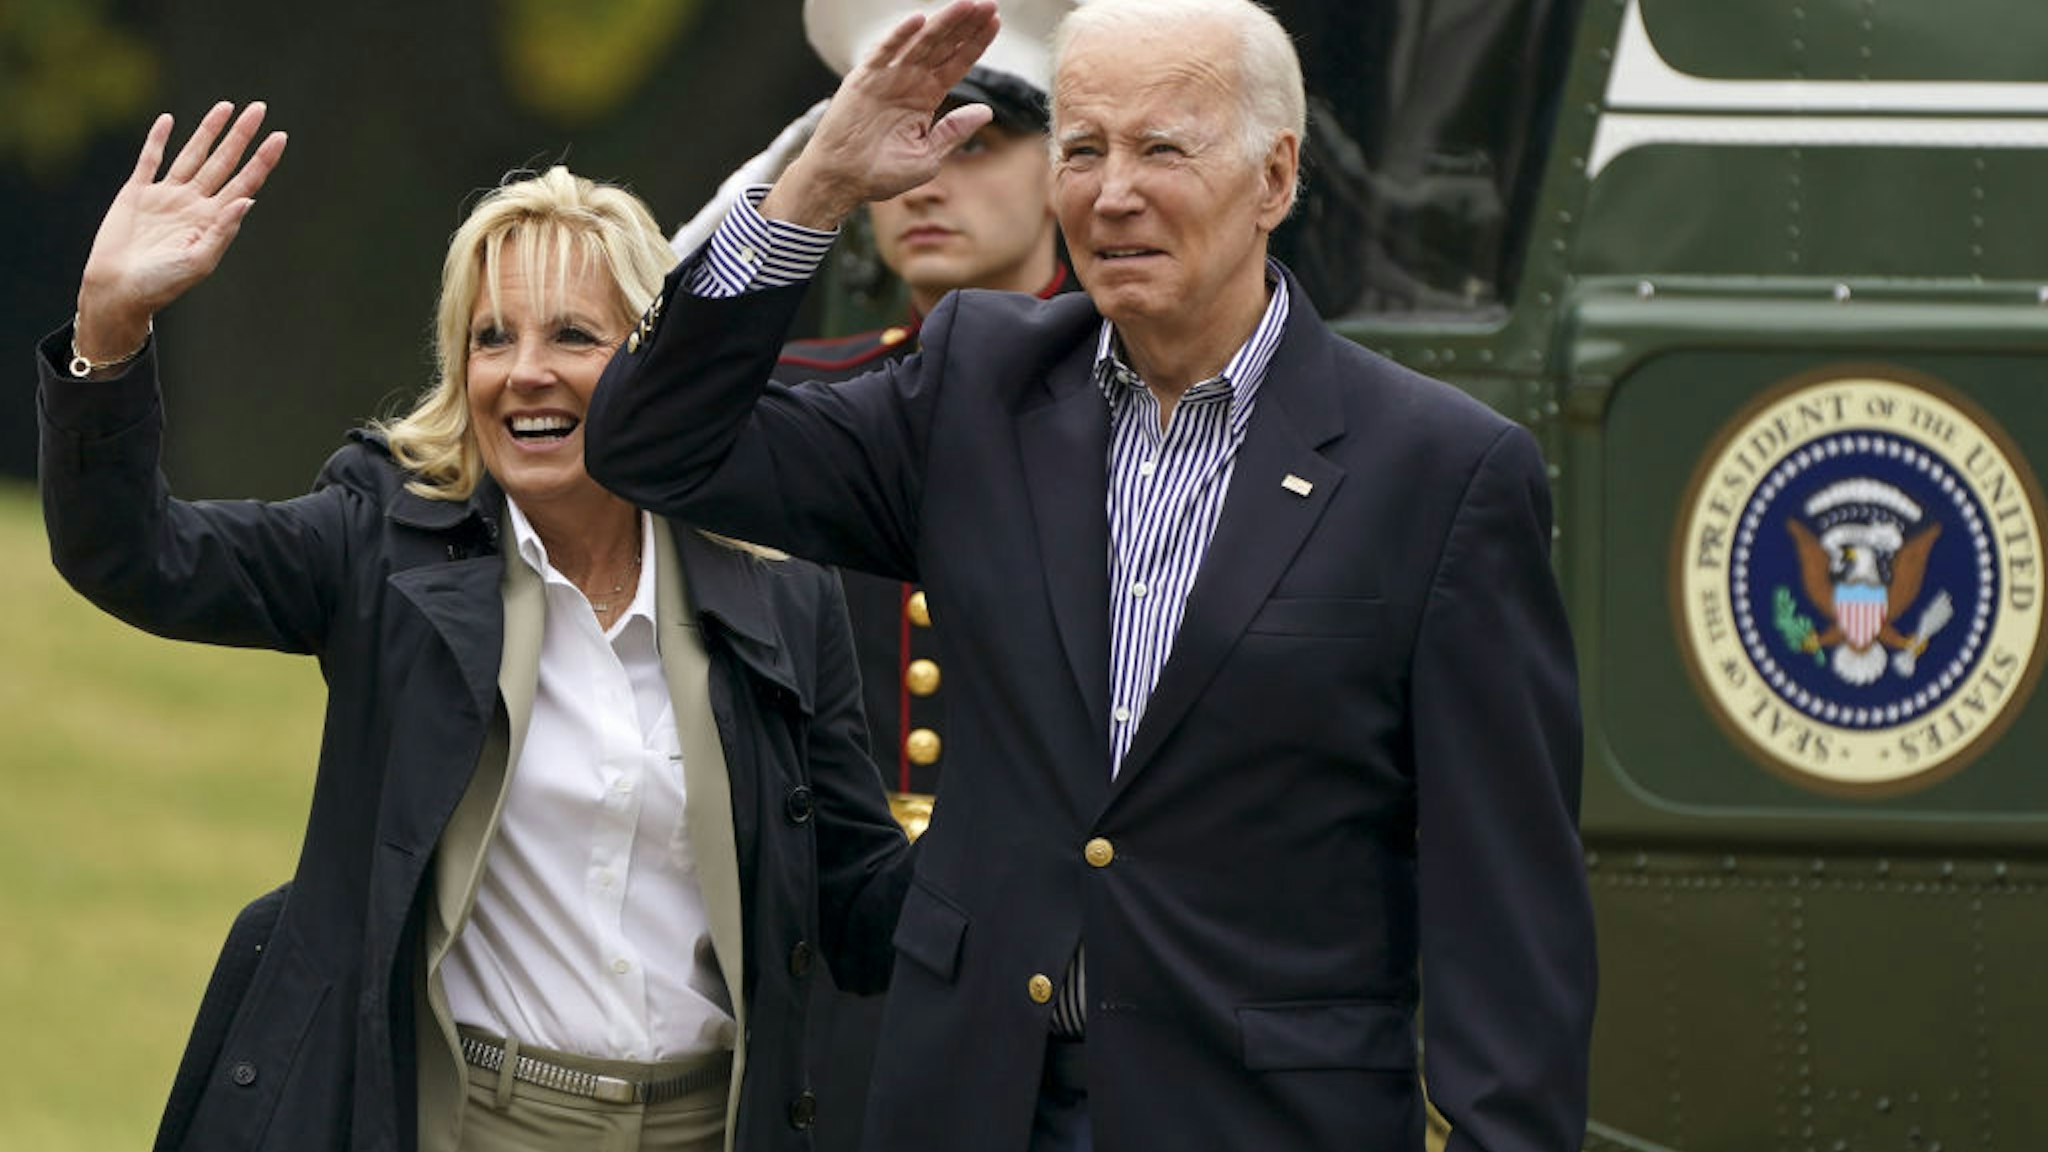 US President Joe Biden and First Lady Jill Biden wave from the South Lawn of the White House before boarding Marine One in Washington, DC, US, on Wednesday, Oct. 5, 2022. Biden will meet with Florida Governor Ron DeSantis today during a tour of areas in his state devastated by Hurricane Ian. Photographer: Leigh Vogel/UPI/Bloomberg via Getty Images